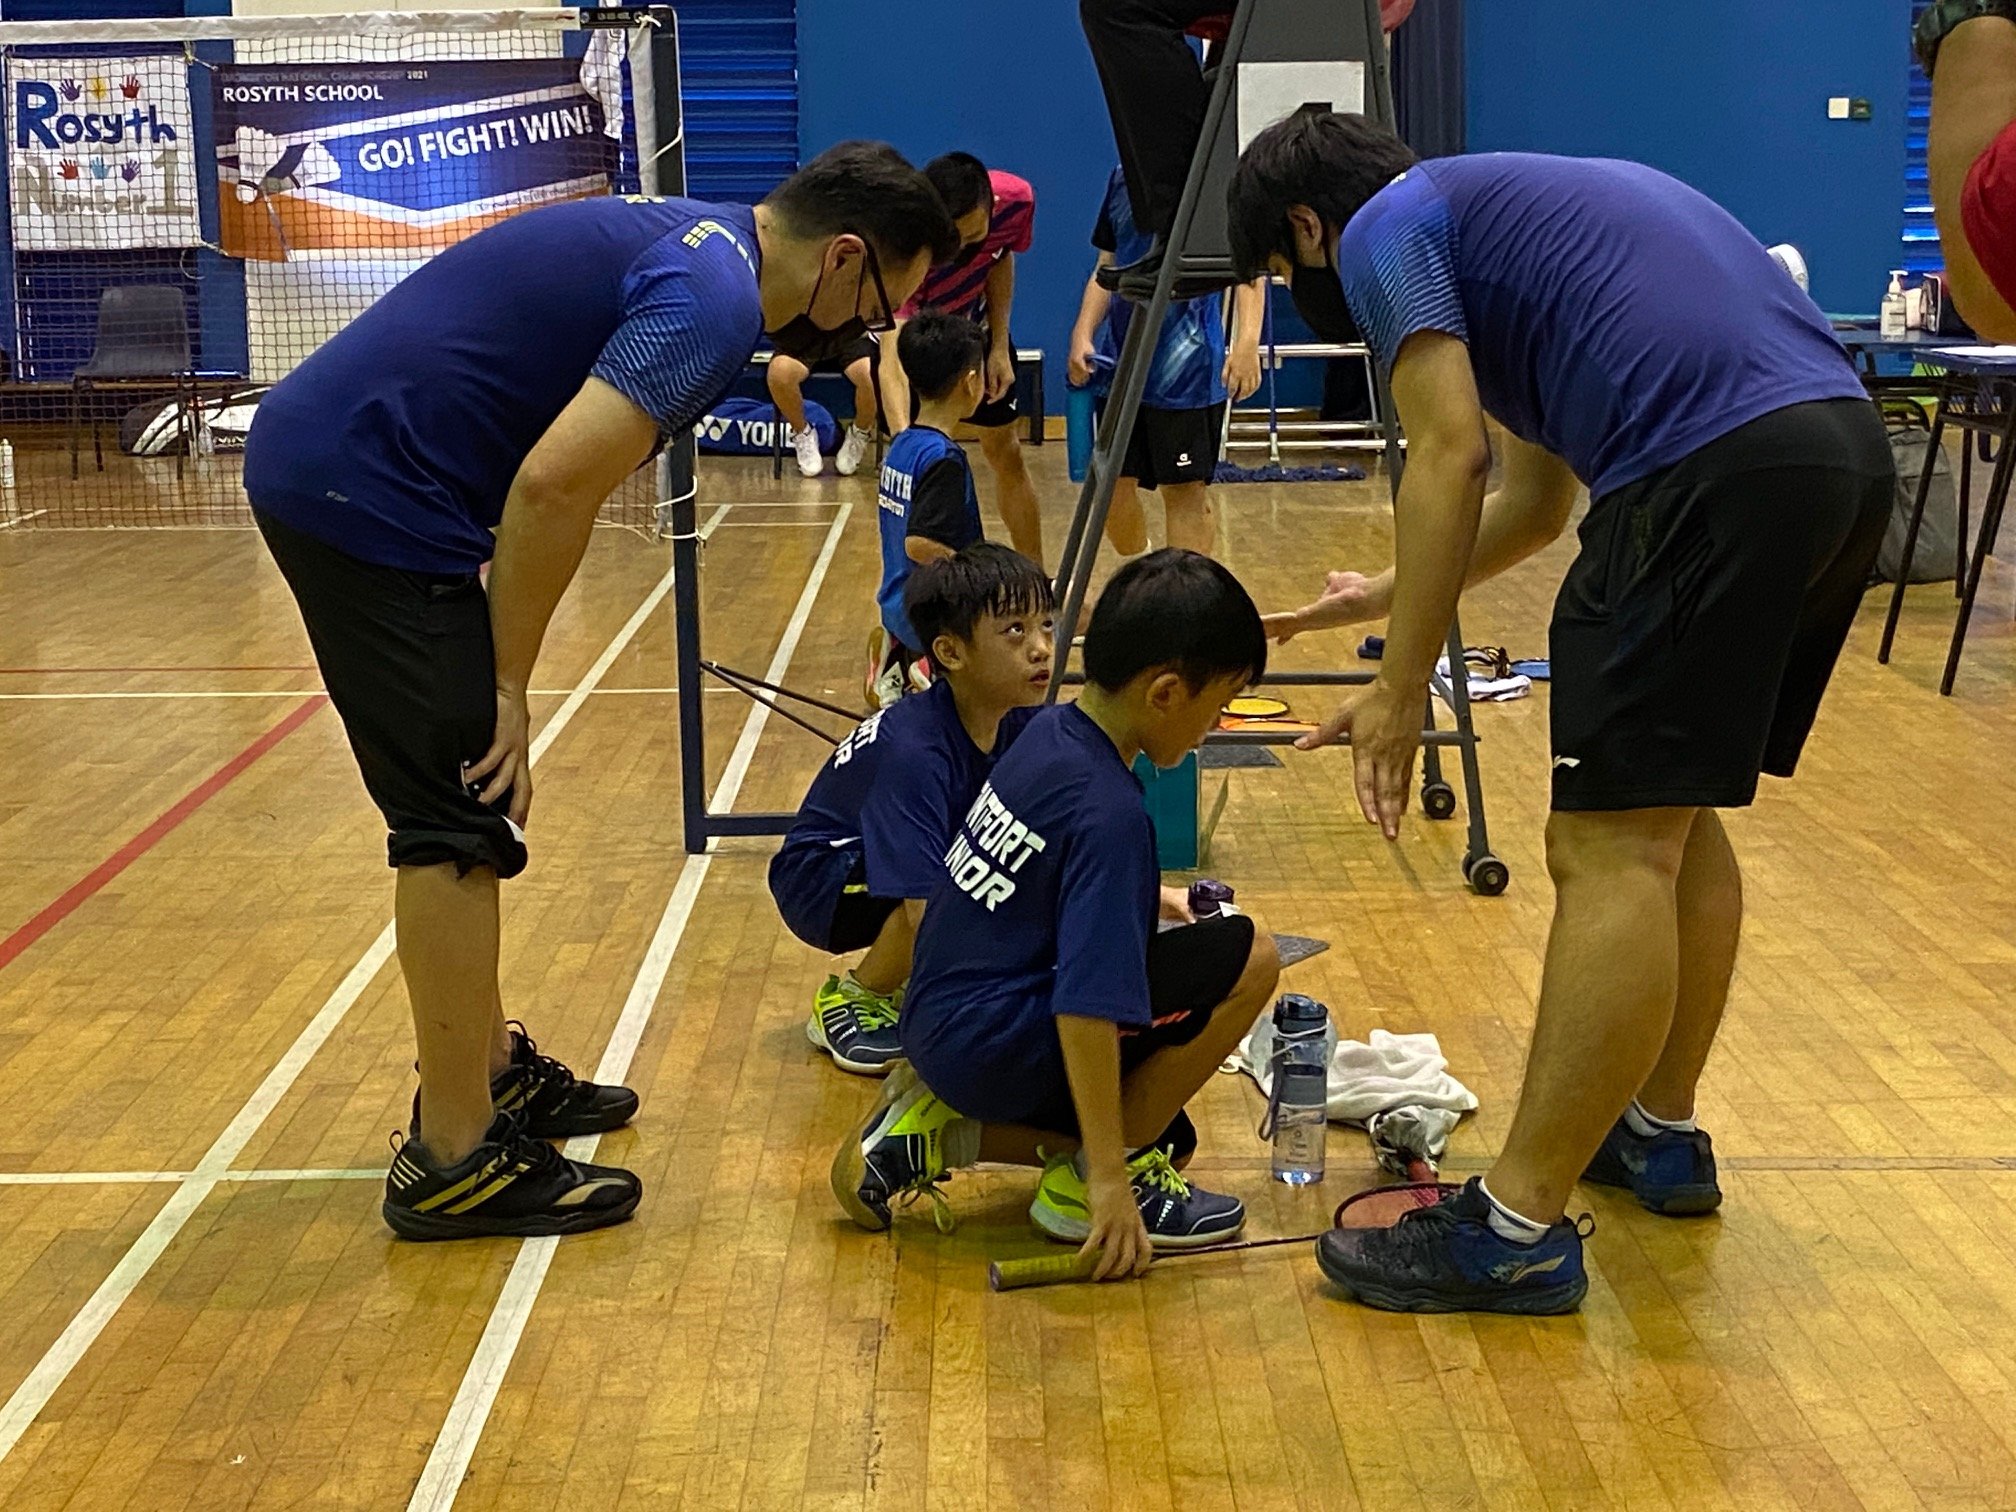 NSG Snr Div North Zone boys’ badminton final - Montfort twins and coaches in second doubles